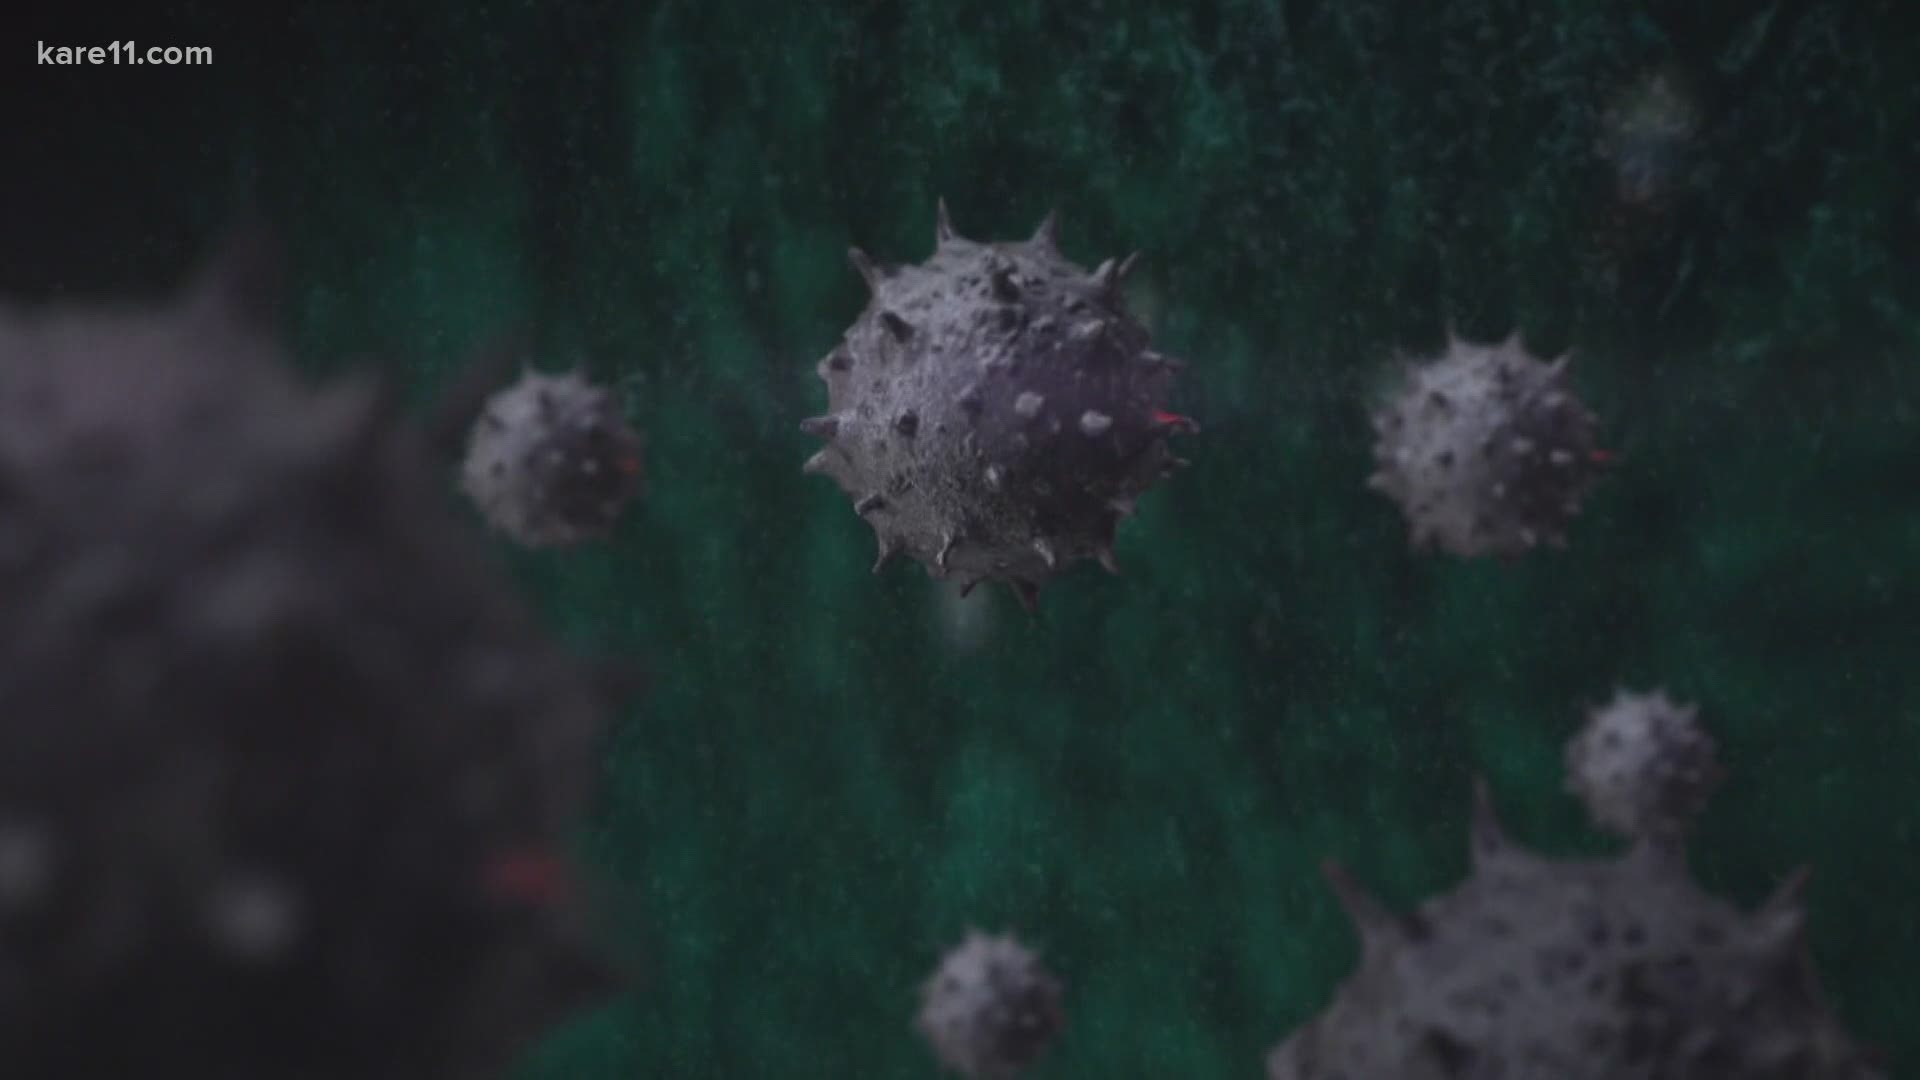 It's been more than six months since Minnesota had its first confirmed case of the coronavirus, and there's still no end in sight.